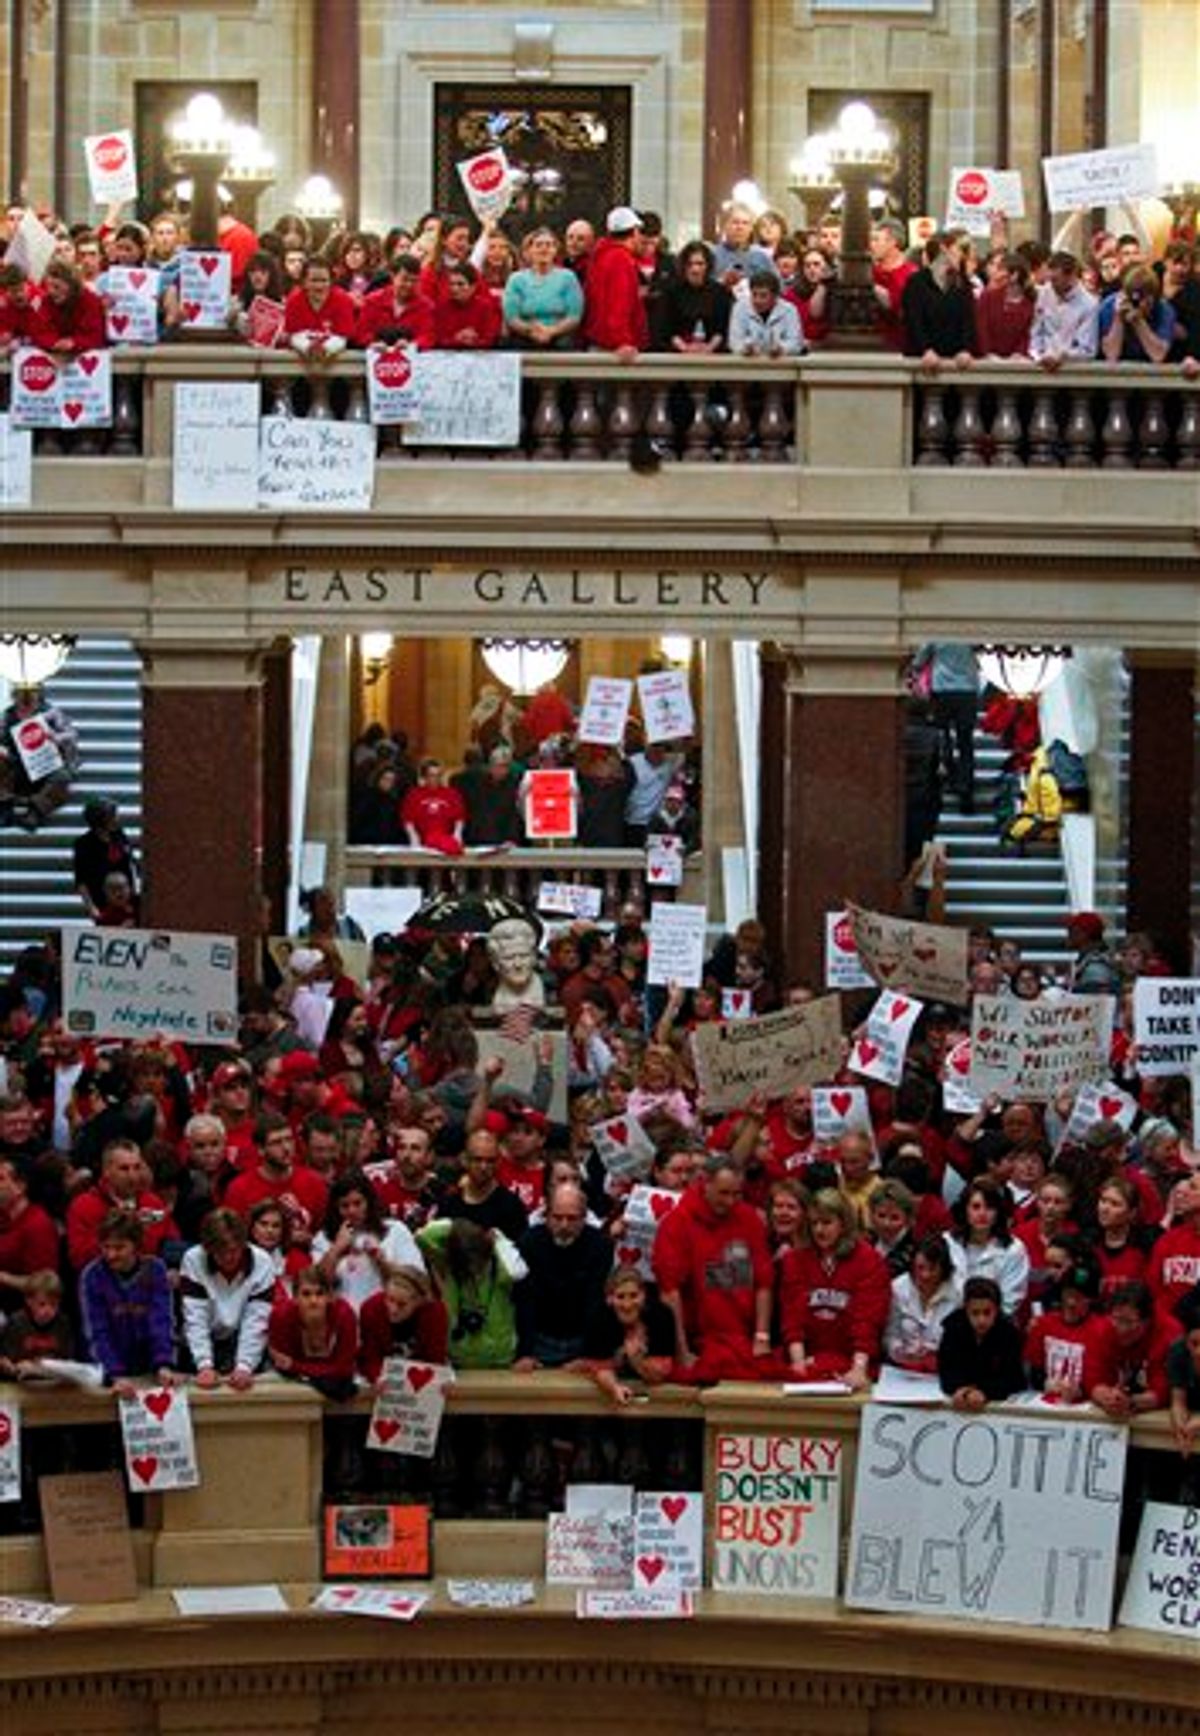 Protestors to Wisconsin Gov. Scott Walker's bill to eliminate collective bargaining rights for many state workers demonstrate in the rotunda at the State Capitol in Madison, Wis., Thursday, Feb. 17, 2011. (AP Photo/Andy Manis) (AP)